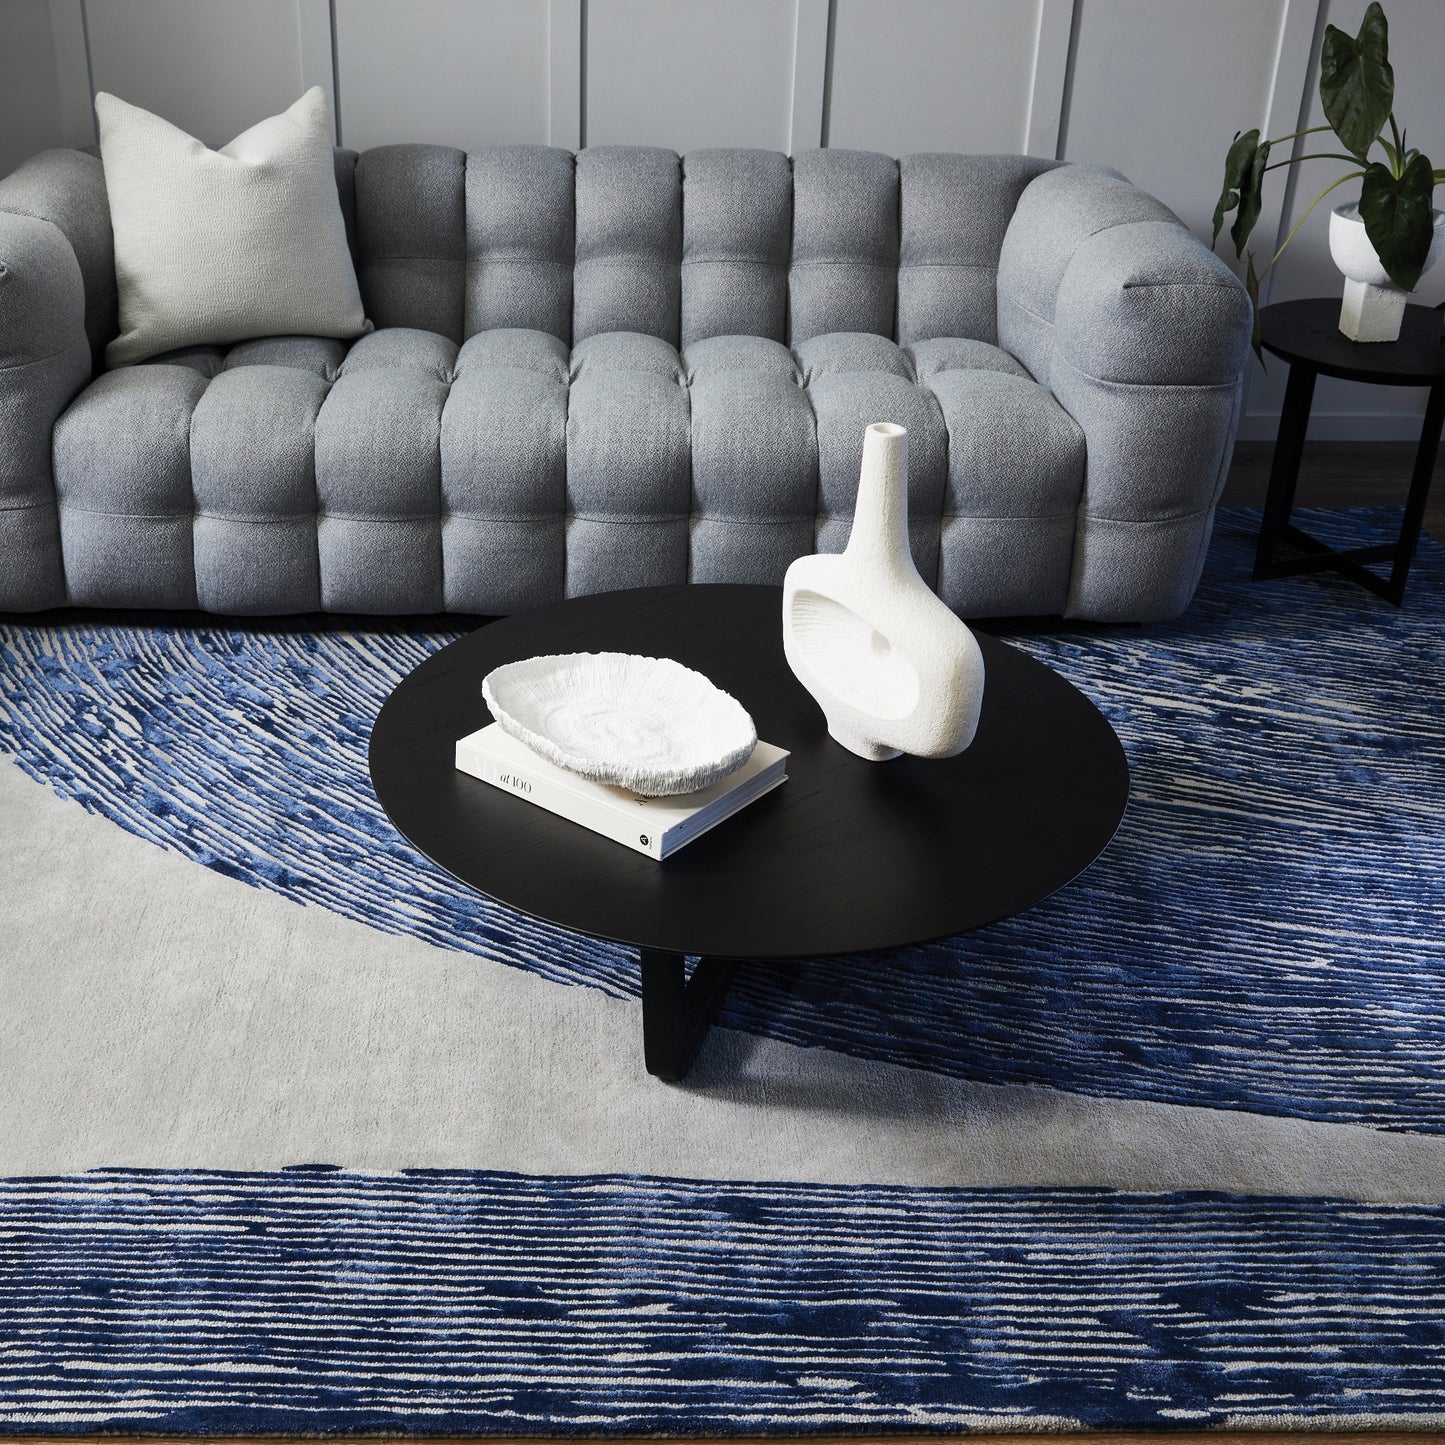 Niagra Denim Rug 20% off from the Rug Collection Stockist Make Your House A Home, Furniture Store Bendigo. Free Australia Wide Delivery